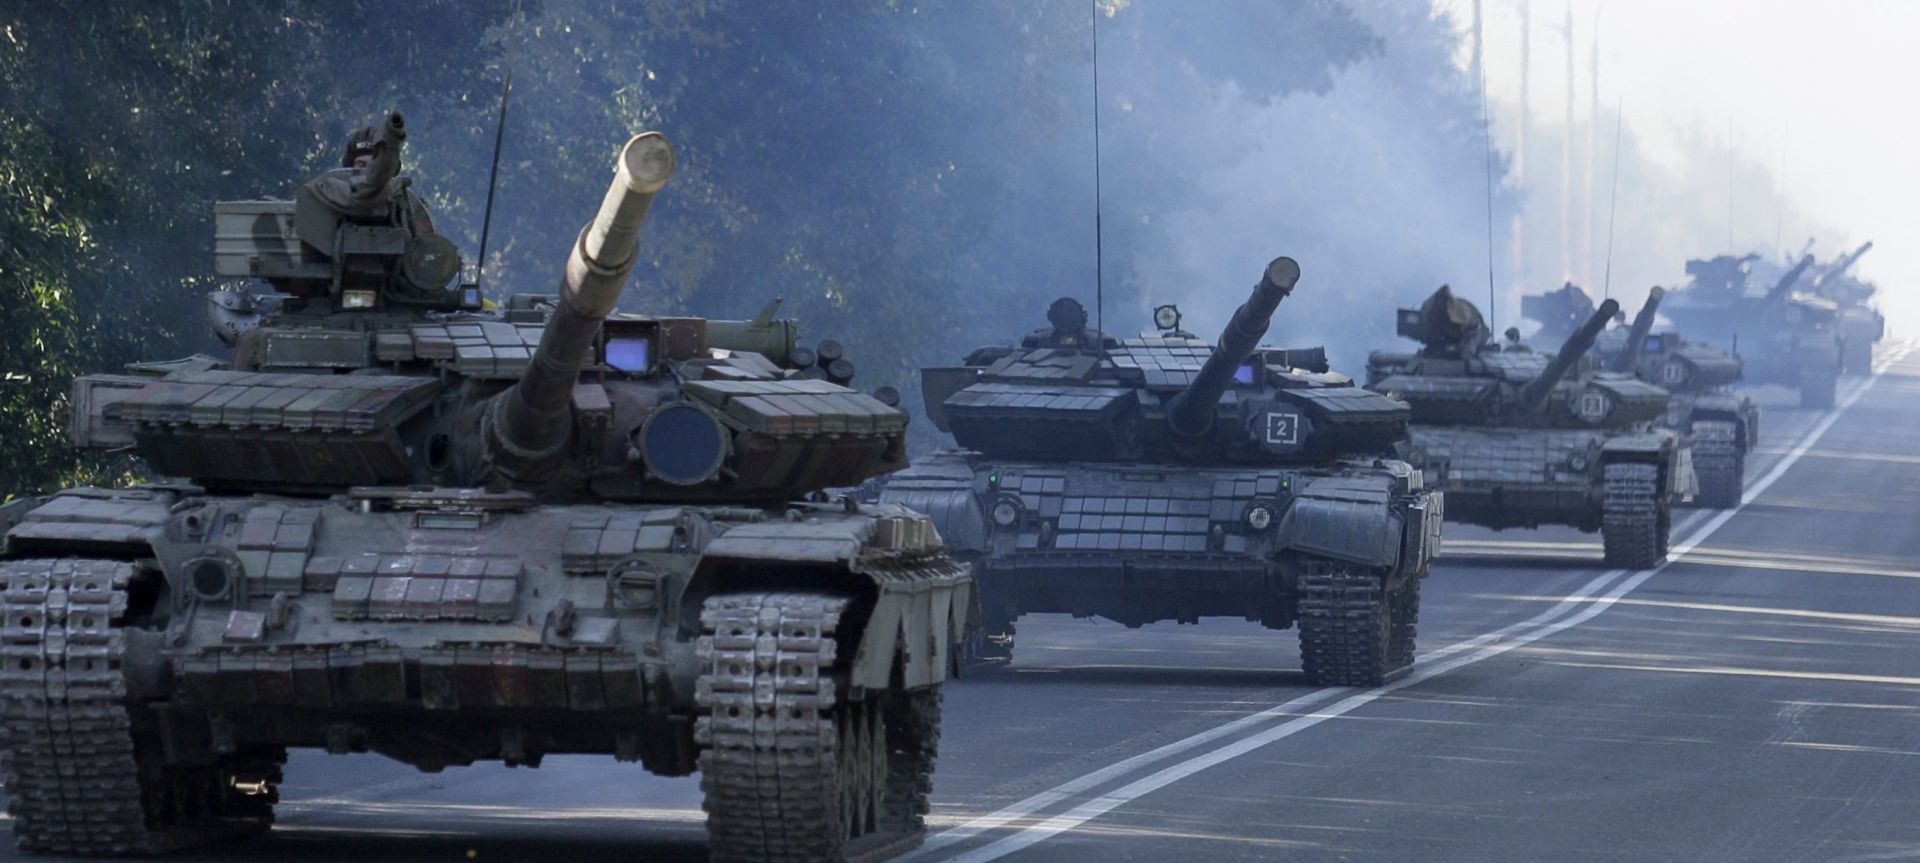 epa04961639 A convoy of pro-Russian separatist tanks drive on a road during, as pro-Russian separatists said, withdrawing their heavy weapons from the front line, in Aleksandrovsk town, near Luhansk, Ukraine, 03 October 2015. Leaders from four countries defended a long-flouted ceasefire agreement for eastern Ukraine on Friday, as withdrawal of small-calibre arms was set to go into effect over the weekend. Ukrainian President Petro Poroshenko said the Ukrainian military would begin withdrawing guns with a calibre of less than 100 millimetres from the front lines on Saturday, describing the agreement as the most significant achievement of the talks. Russian President Vladimir Putin's spokesman, Dmitry Peskov, confirmed that the sides agreed that the withdrawal would begin 'tomorrow at midnight.' While no major breakthroughs were announced after talks lasting nearly five hours, both French President Francois Hollande and German Chancellor Angela Merkel said the region was on the right track toward meeting a peace accord signed in Minsk in February. Local elections in rebel-held areas will be postponed until observers could ensure that they would proceed legally, Hollande said after the talks in Paris. The rebel governments in Donetsk and Luhansk had planned to hold elections on October 18 and November 1, respectively. The regular regional elections in Ukraine are scheduled for October 25.  EPA/ALEXANDER ERMOCHENKO